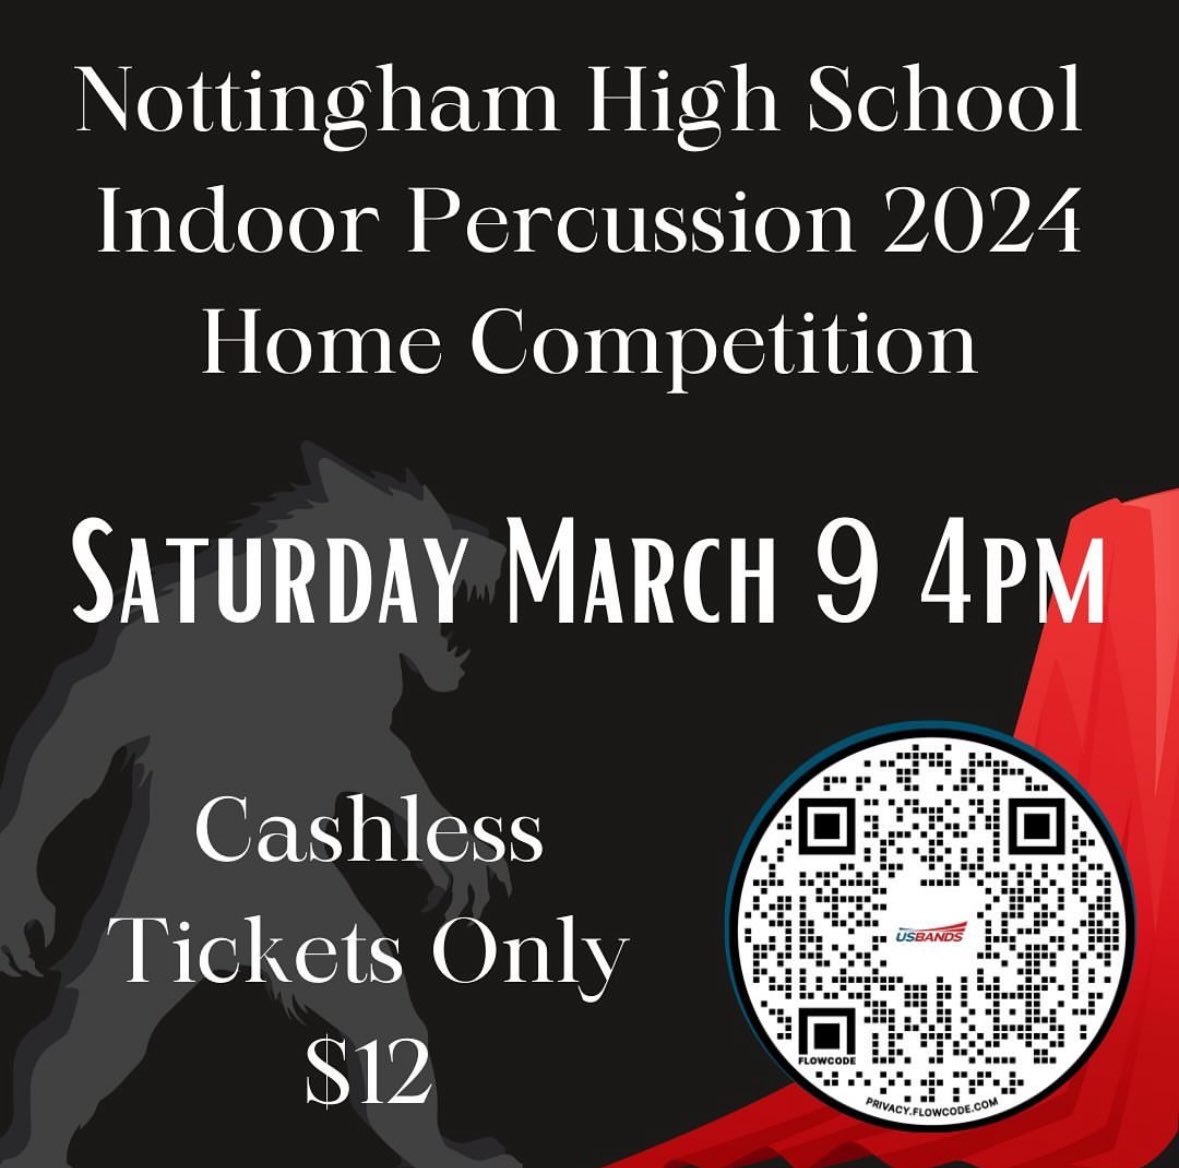 Come see our Indoor Percussion Competition!